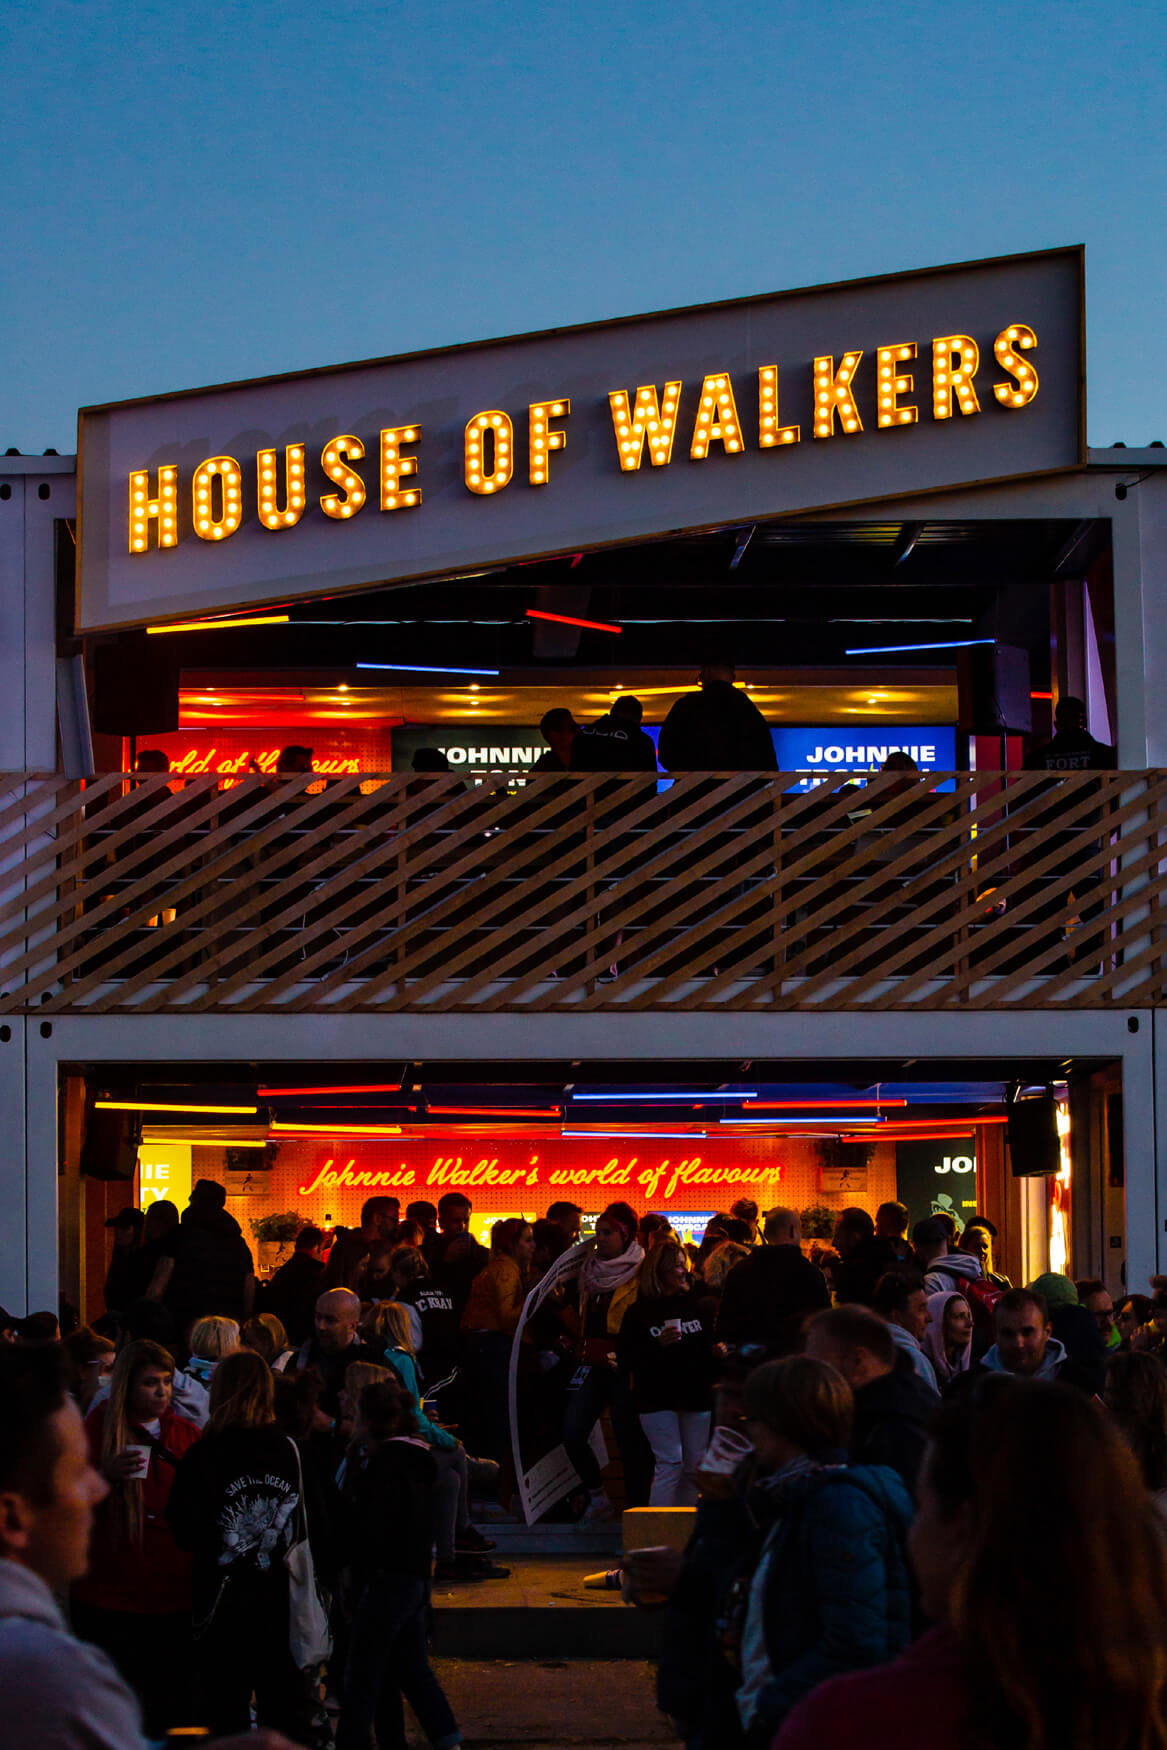 House Of walkers - House of Walkers - metal sheet letters filled with bulbs above the entrance